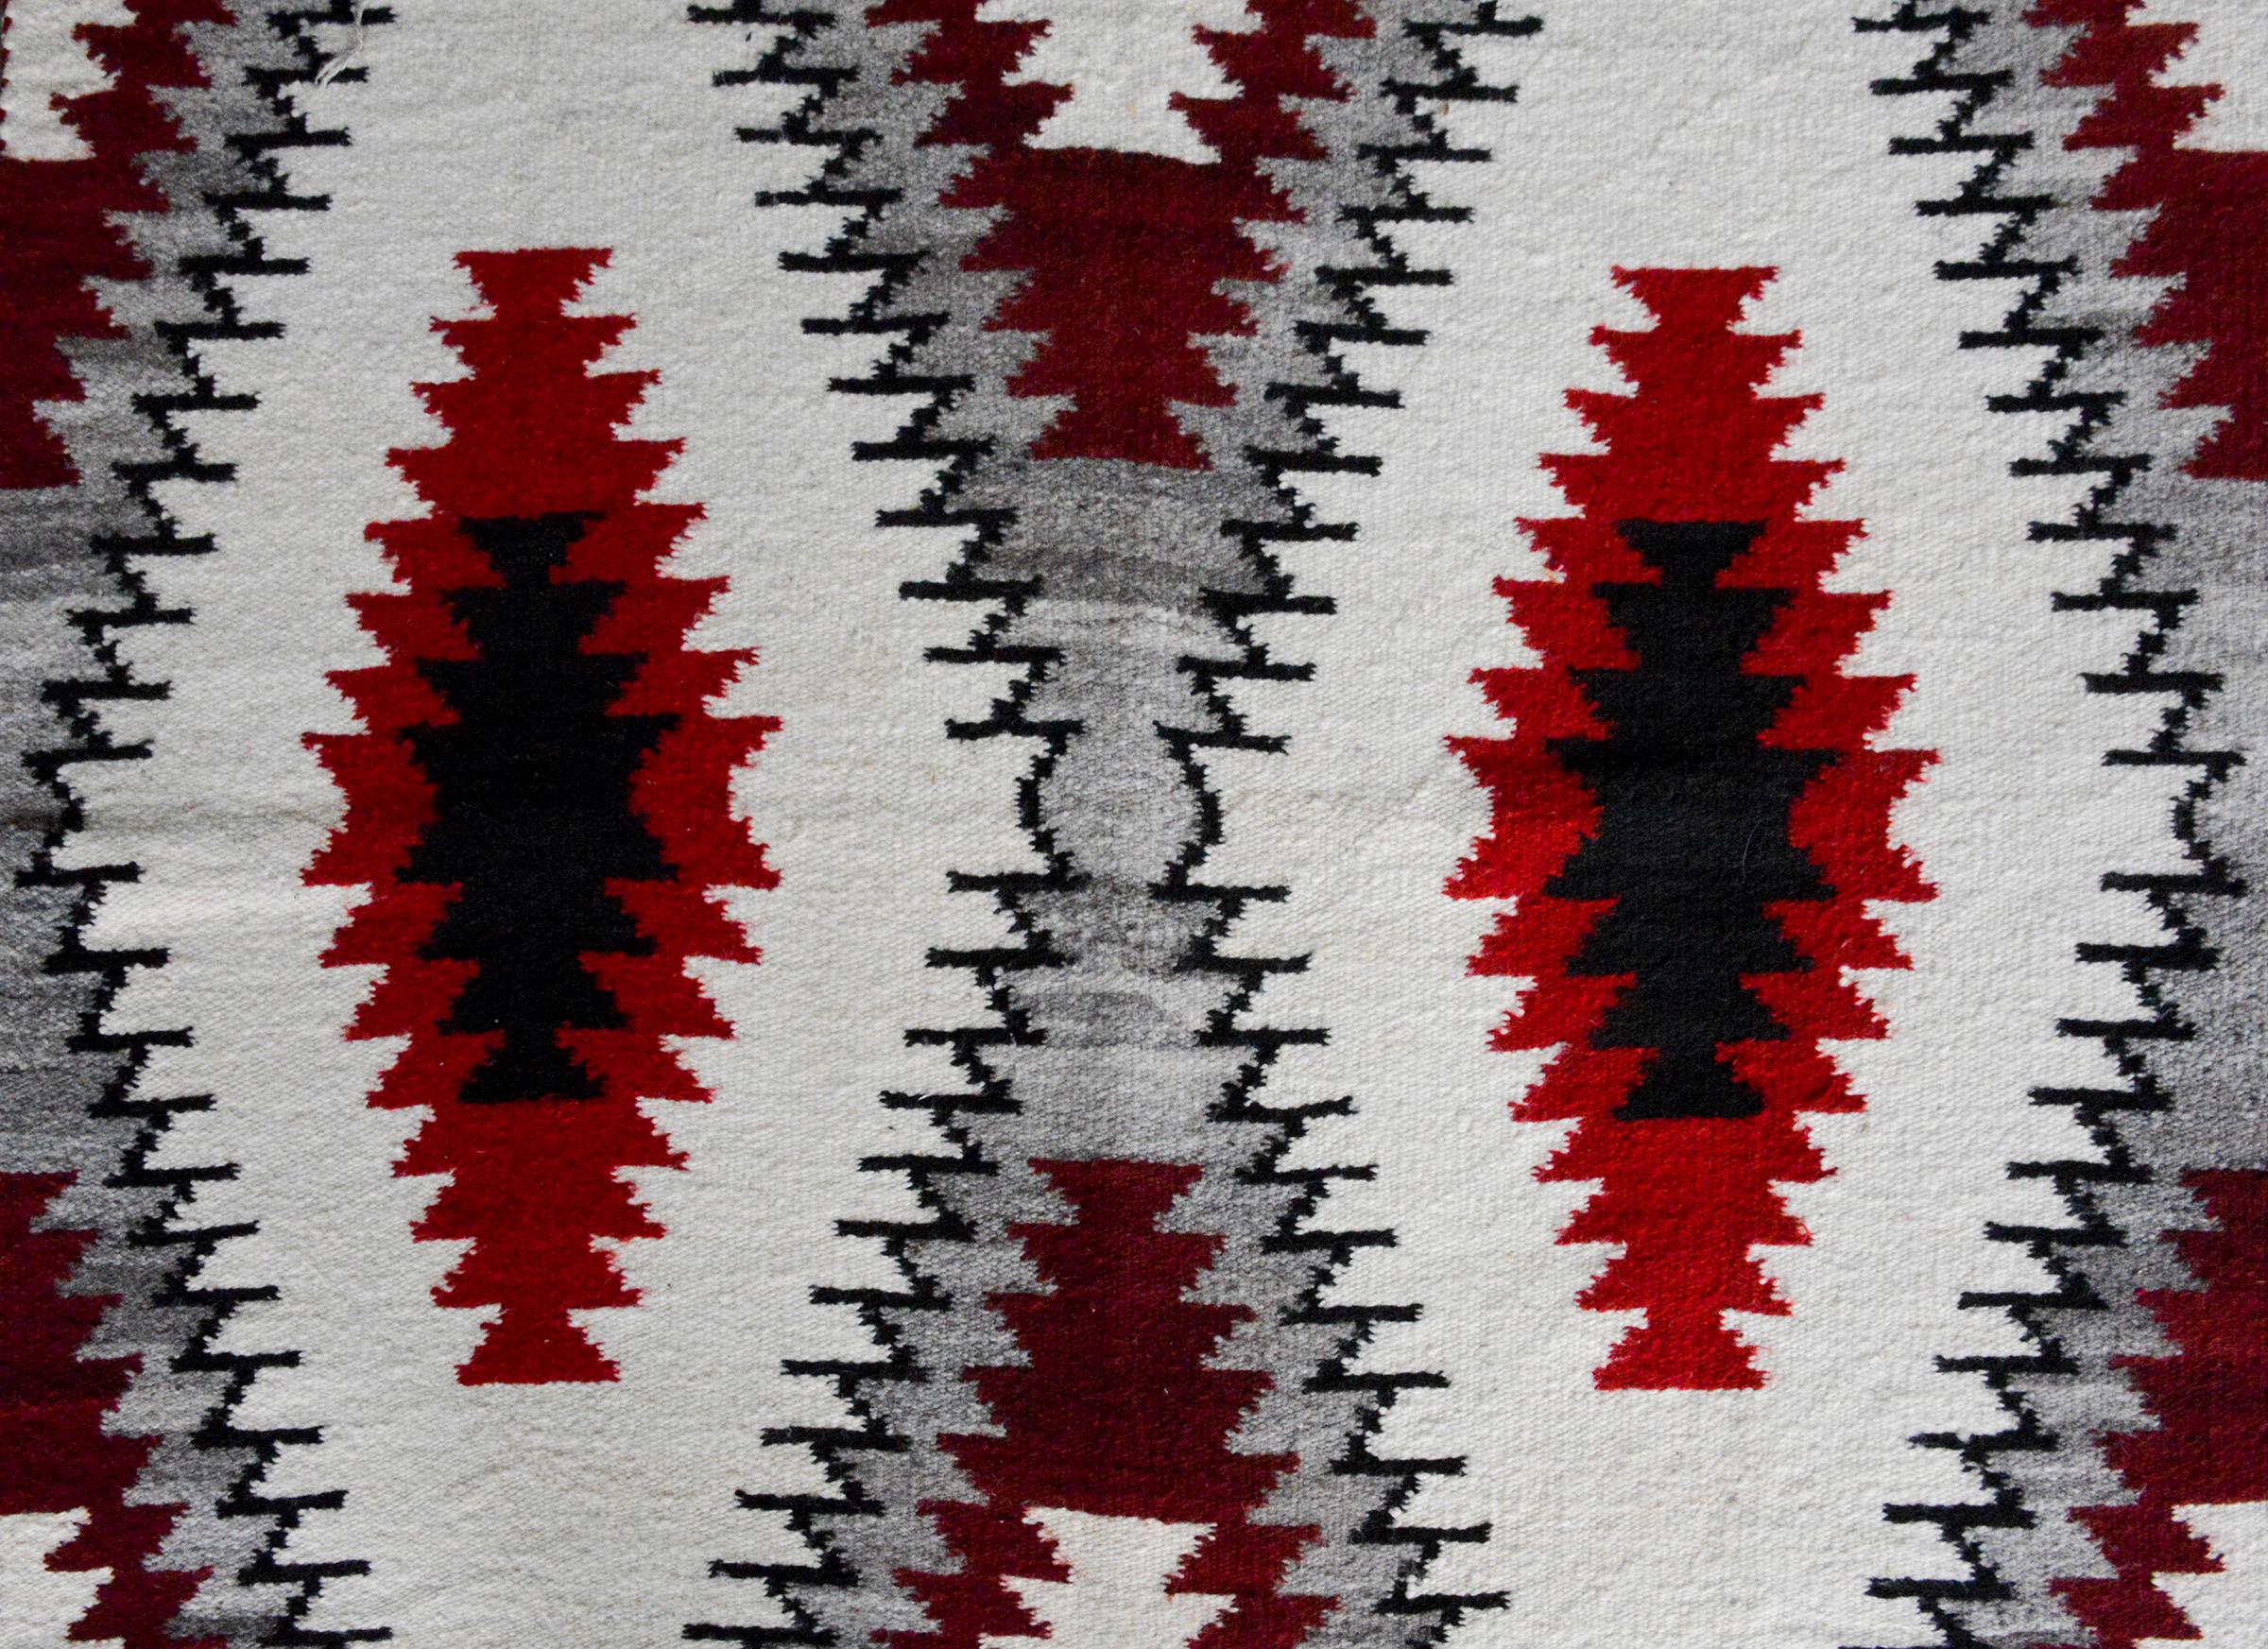 A striking early 20th century Navajo blanket with a bold all-over diamond pattern woven in crimson, white, gray, and black wool.